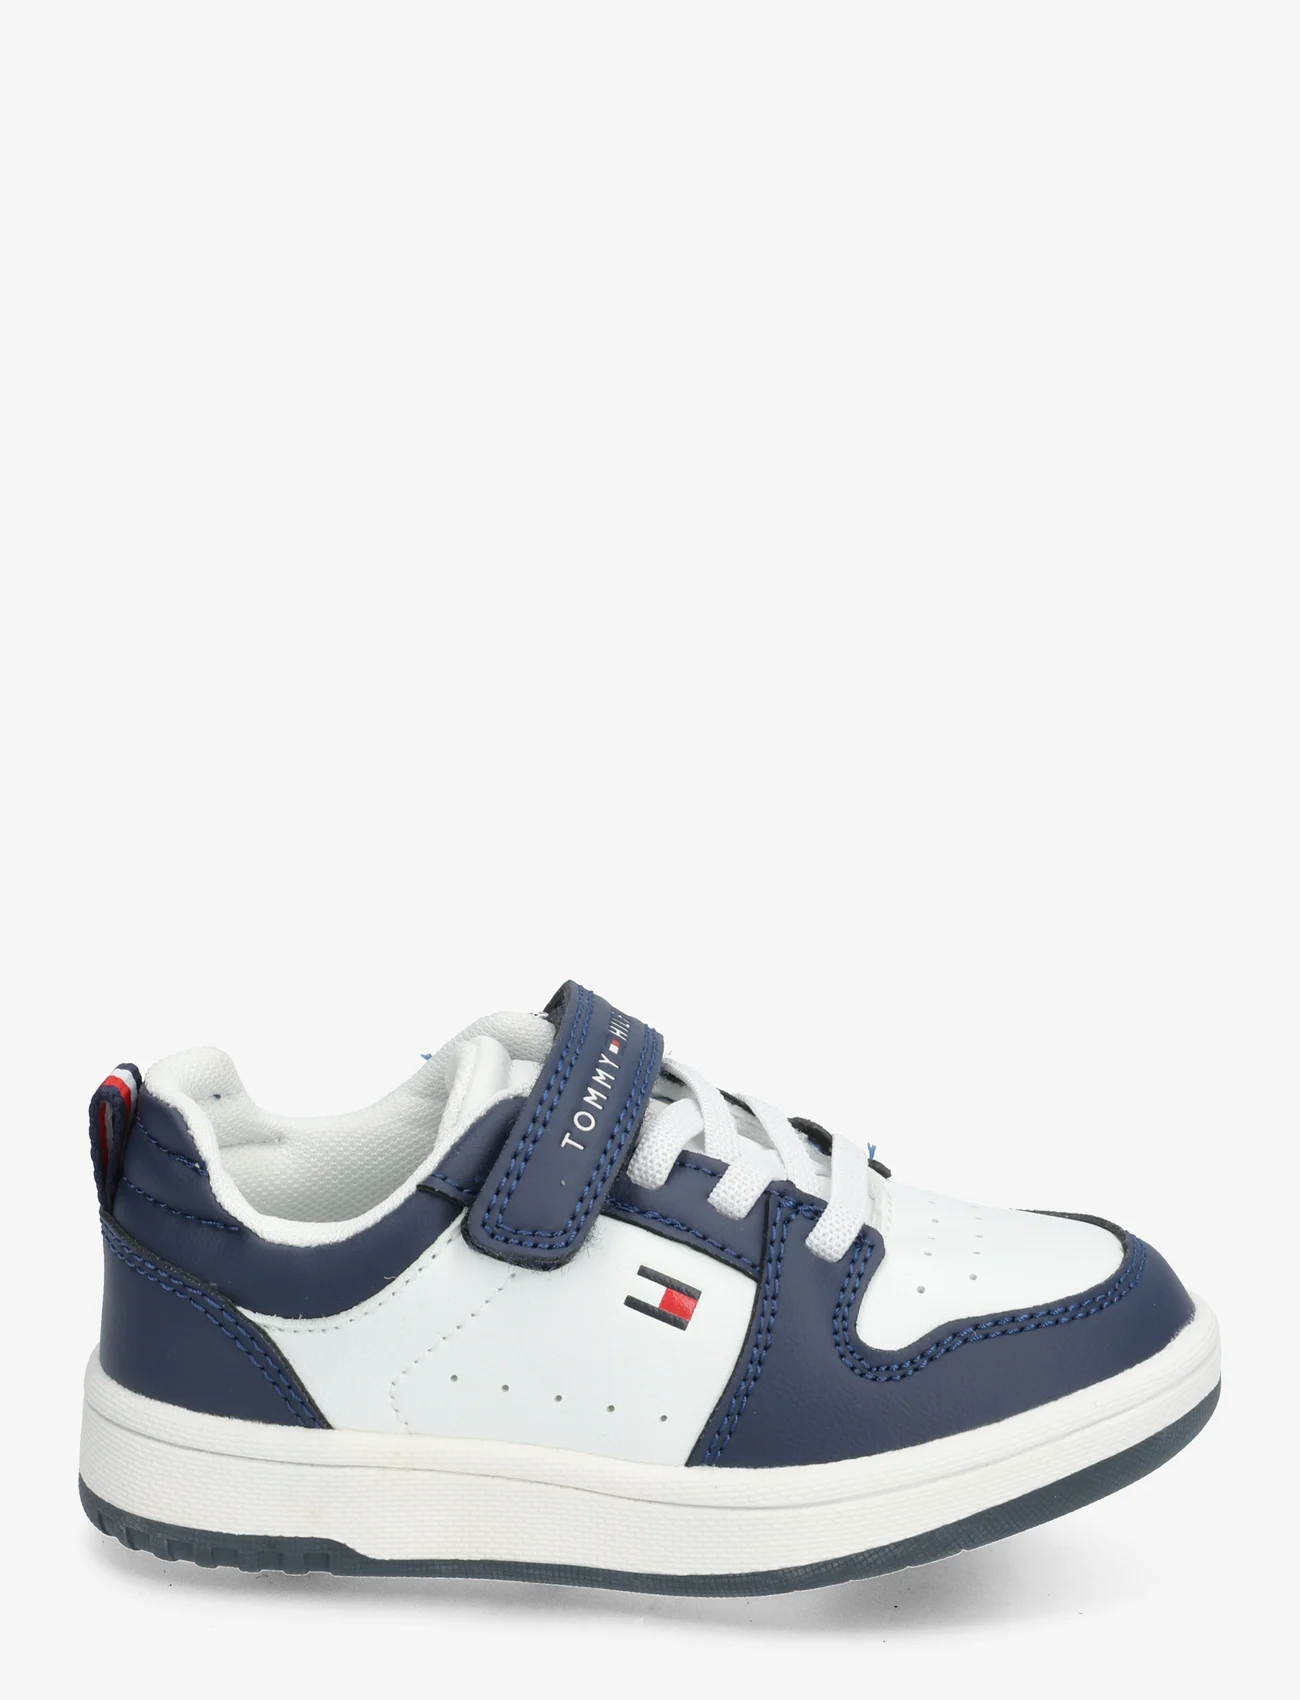 Tommy Hilfiger - LOW CUT LACE-UP/VELCRO SNEAKER - sommarfynd - blue/white - 1